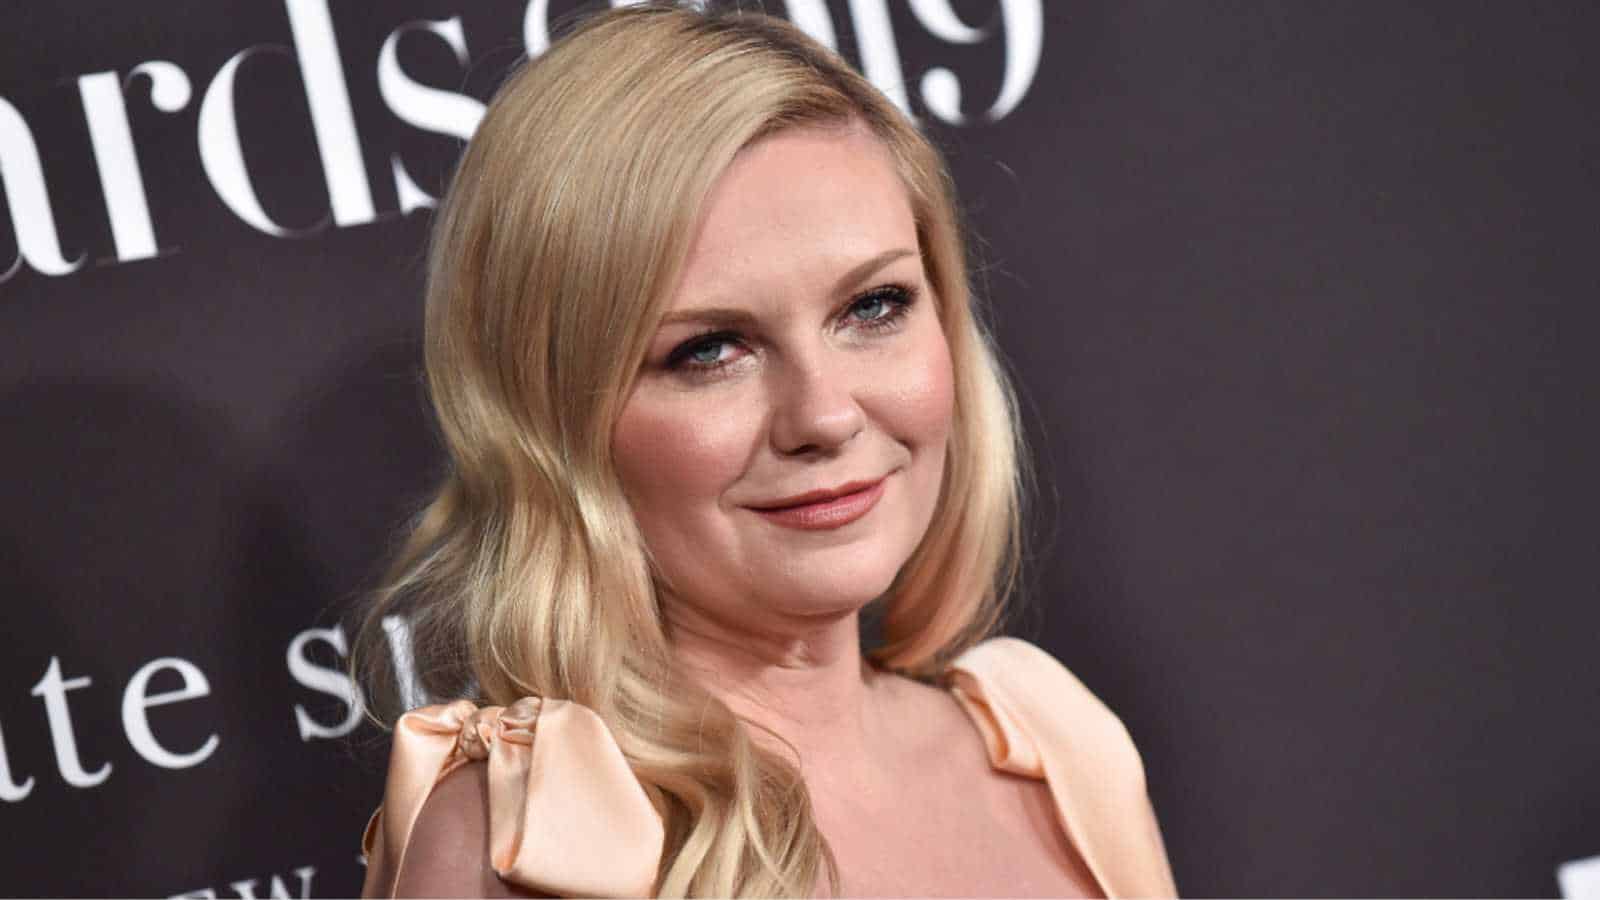 LOS ANGELES - OCT 21: Kirsten Dunst arrives for the 2019 InStyle Awards on October 21, 2019 in Los Angeles, CA